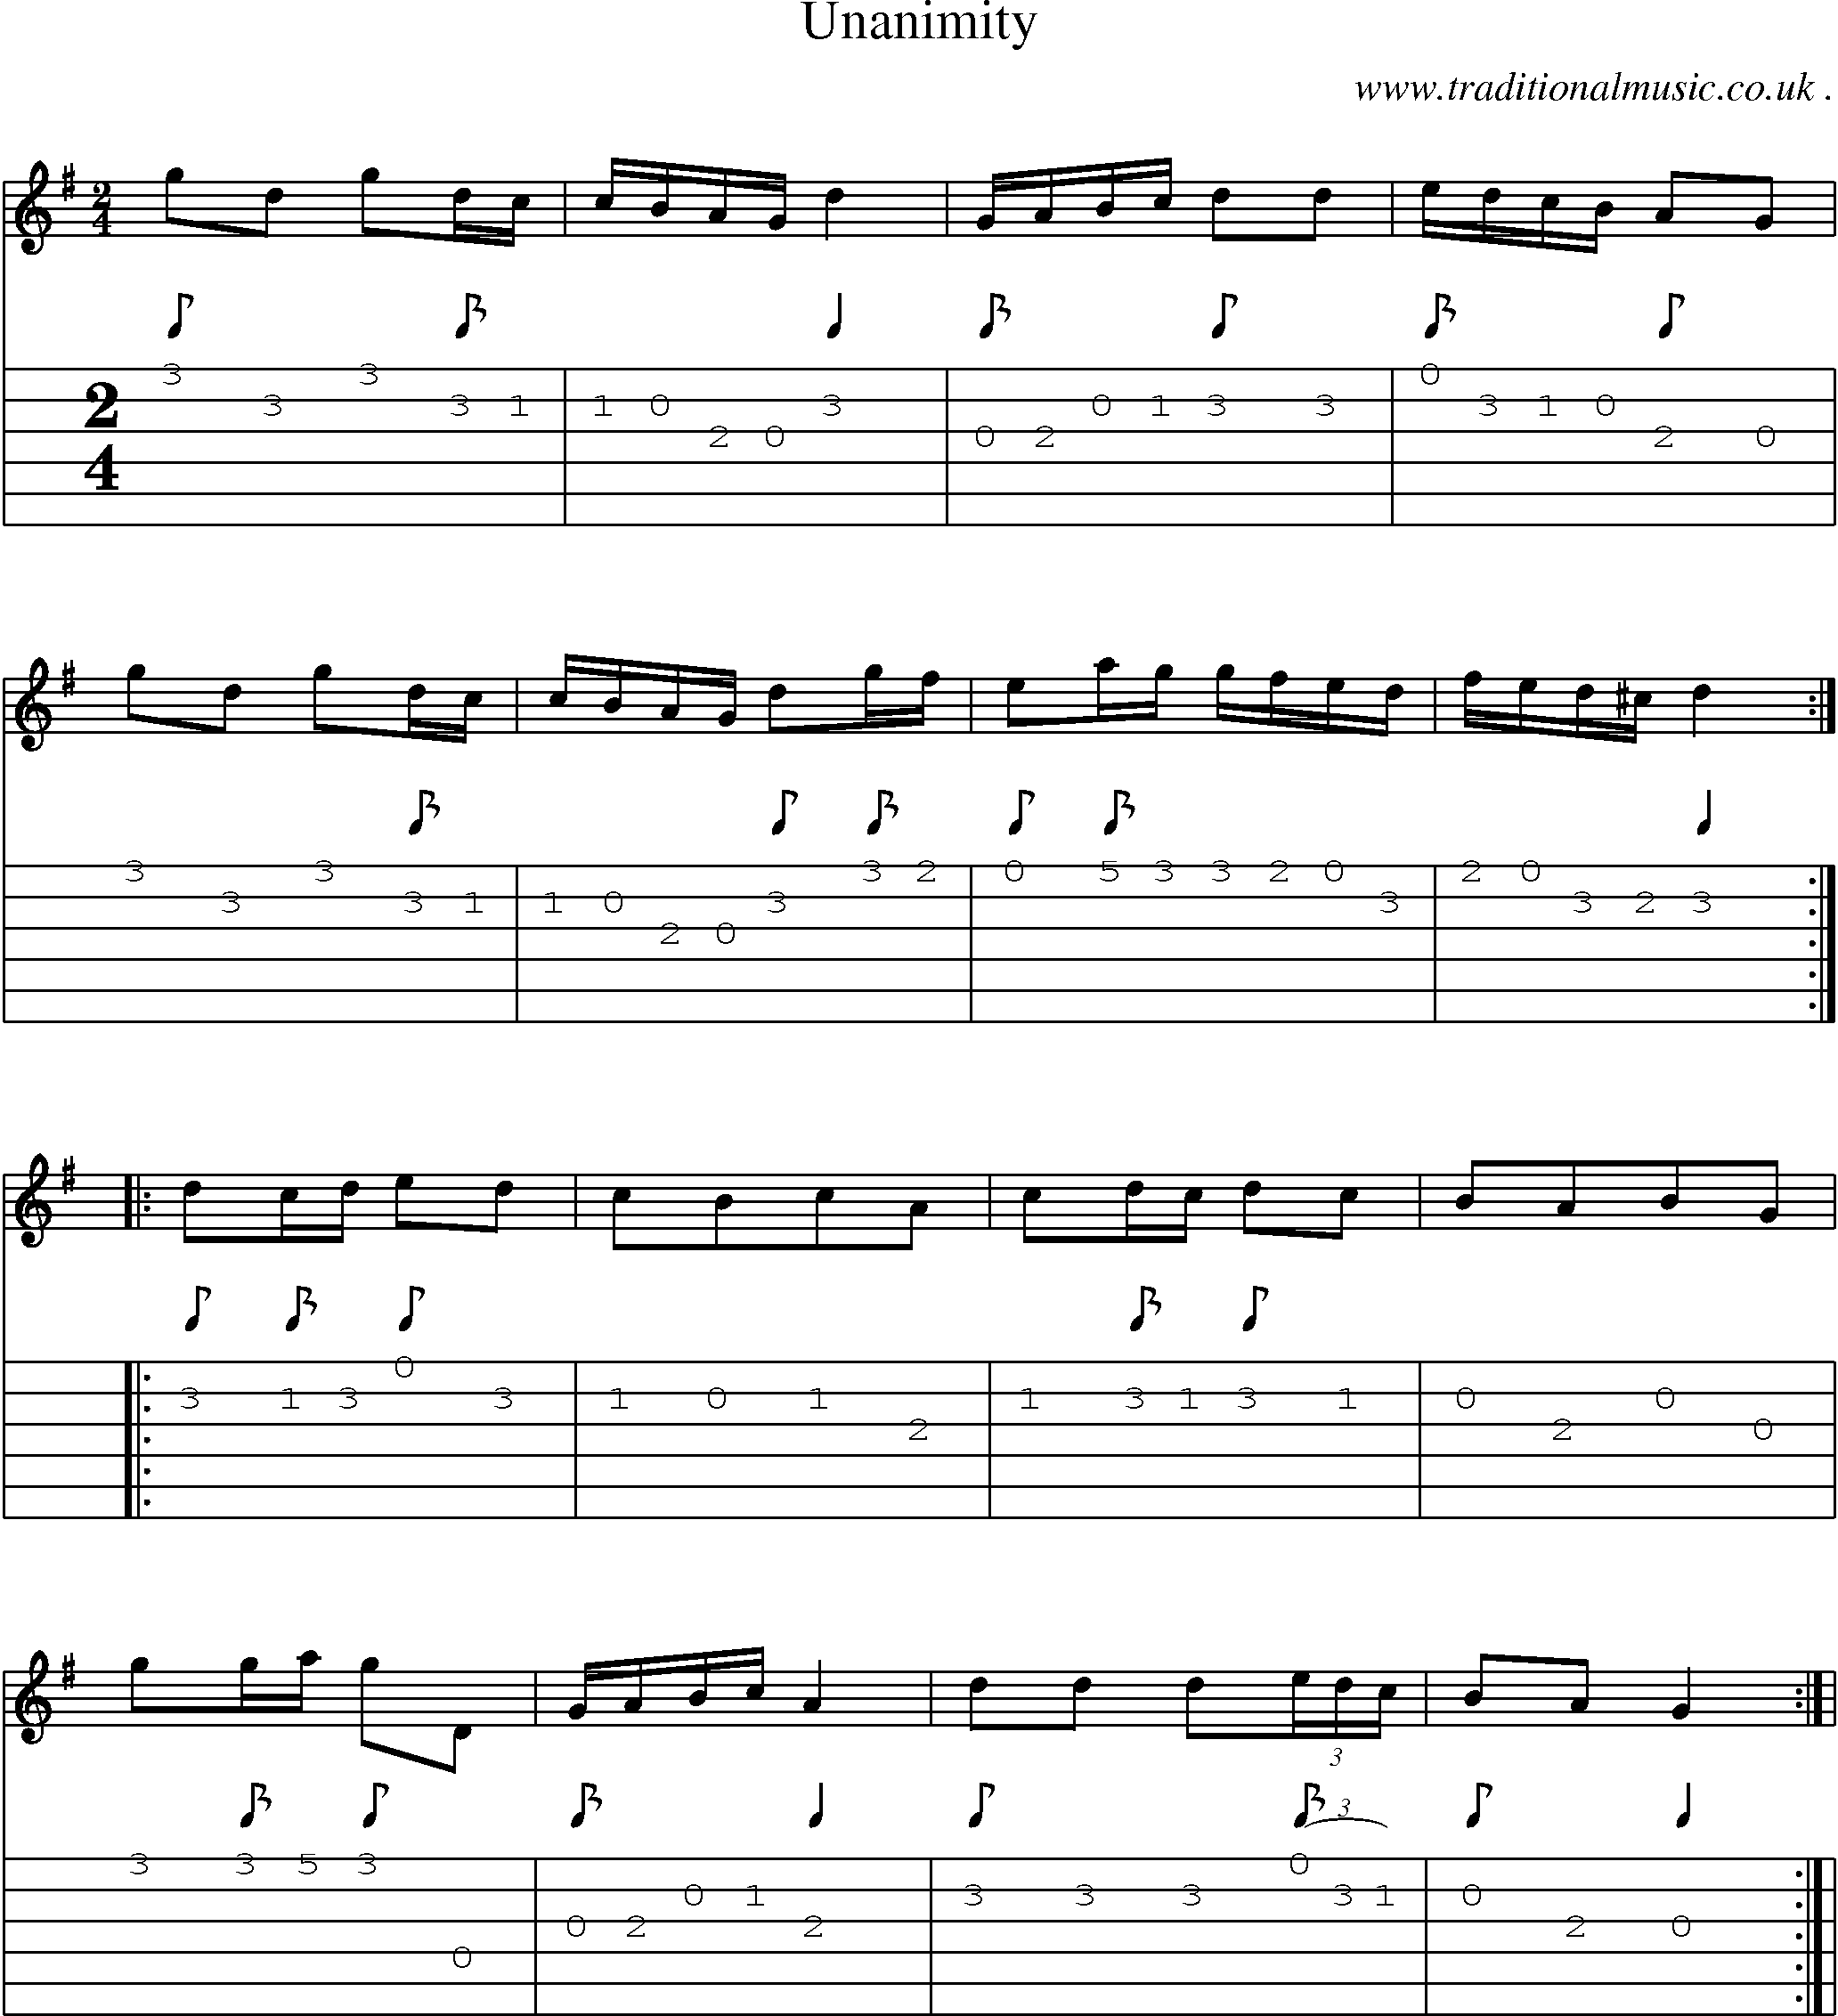 Sheet-Music and Guitar Tabs for Unanimity